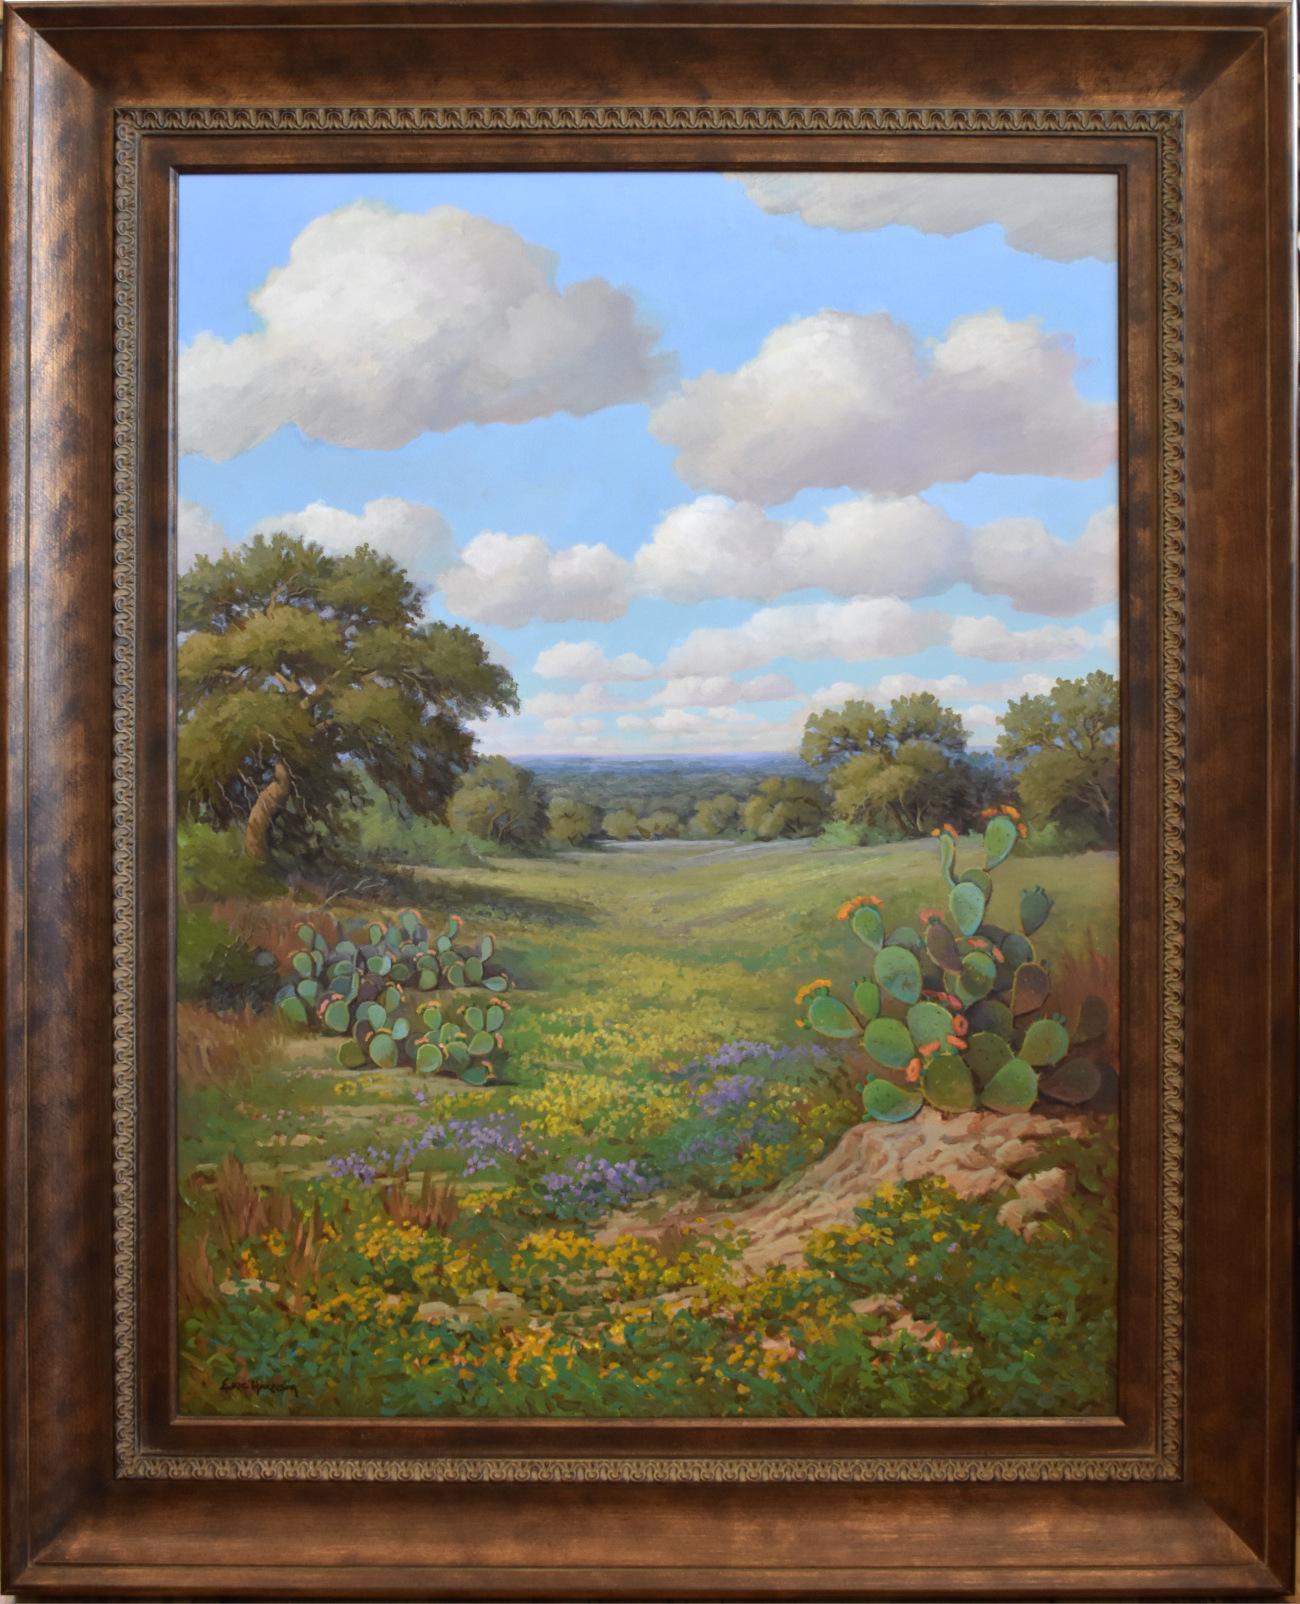 Eric Harrison Landscape Painting -  "Summer Splendor" Texas Hill Country Prickley Pear Cactus in Bloom Wildflowers